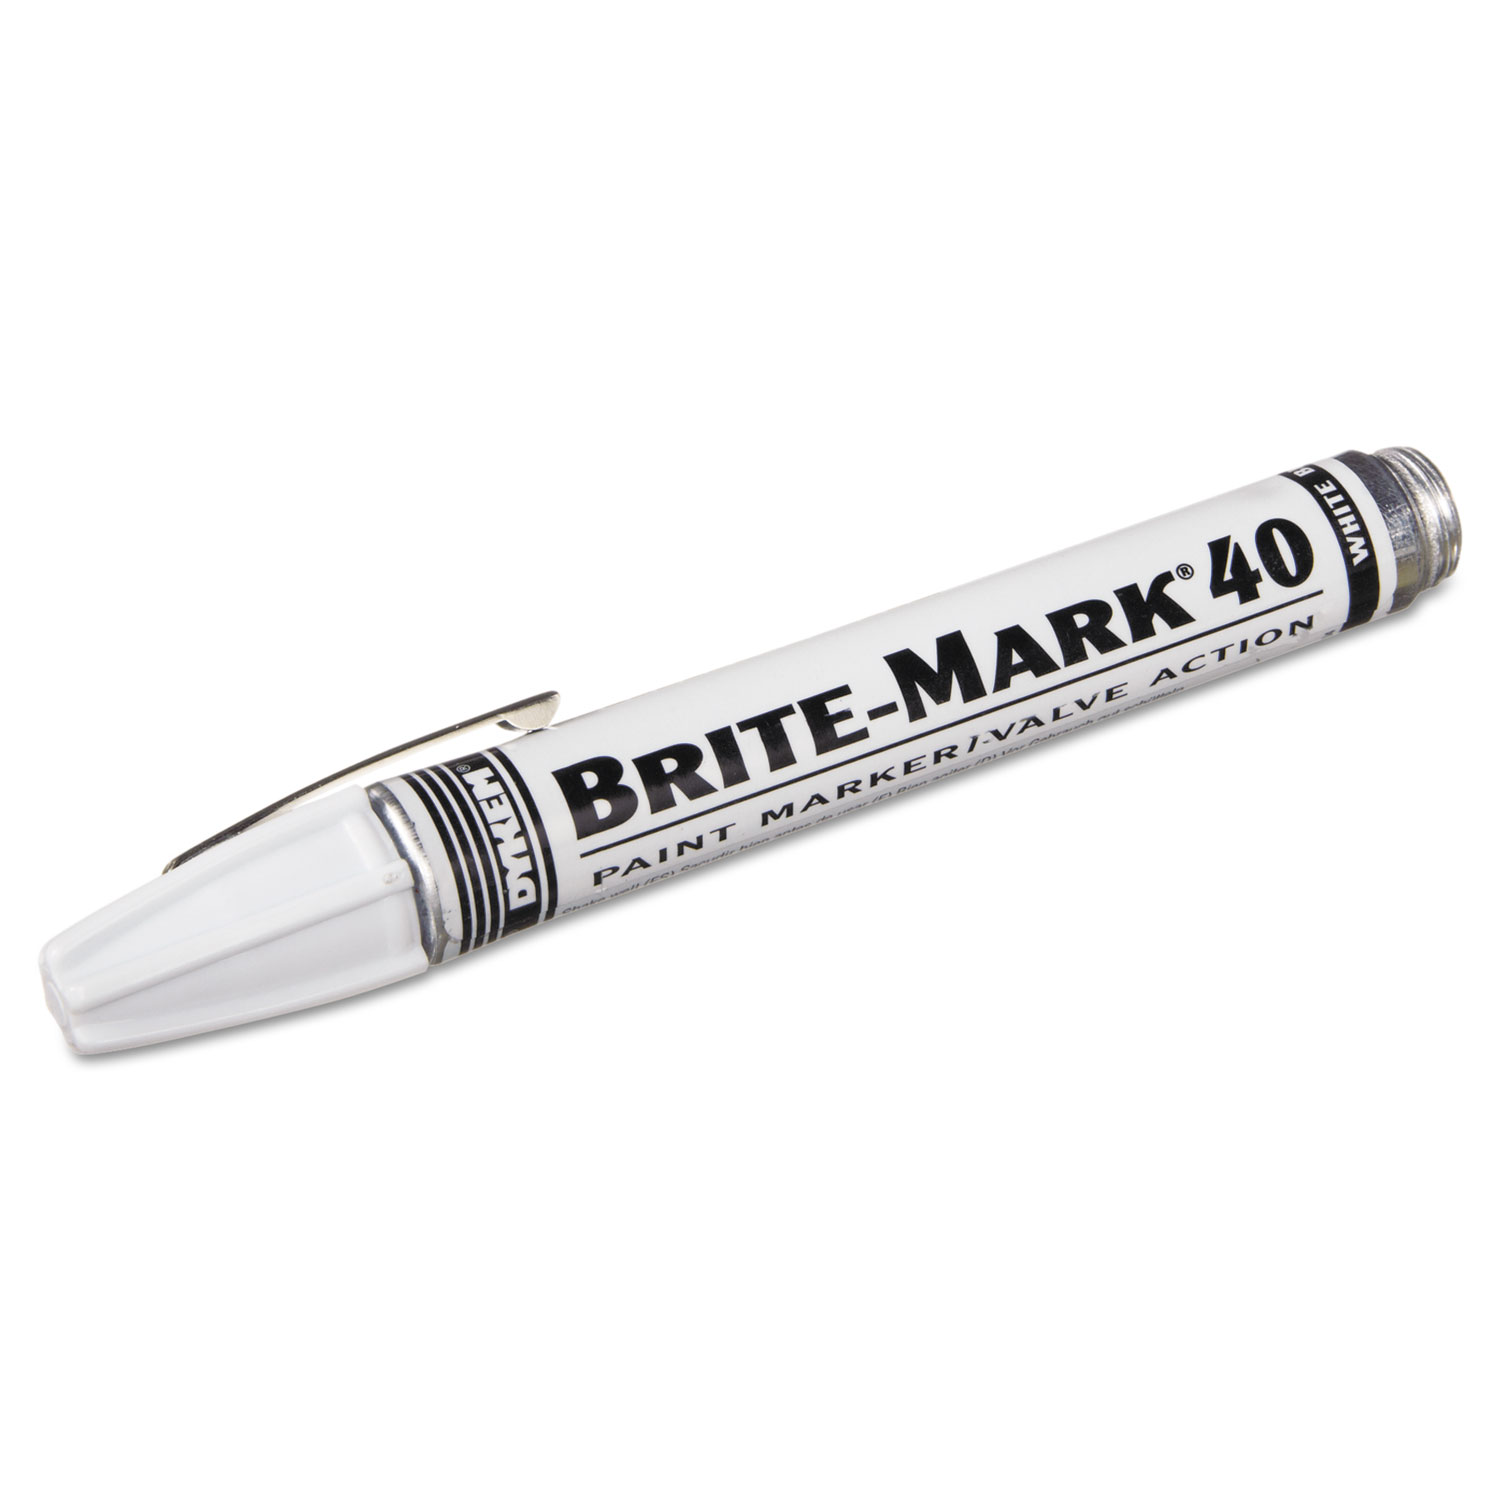  DYKEM 40008 BRITE-MARK 40 Paint Markers, Broad Bullet Tip, White (ITW40008) 